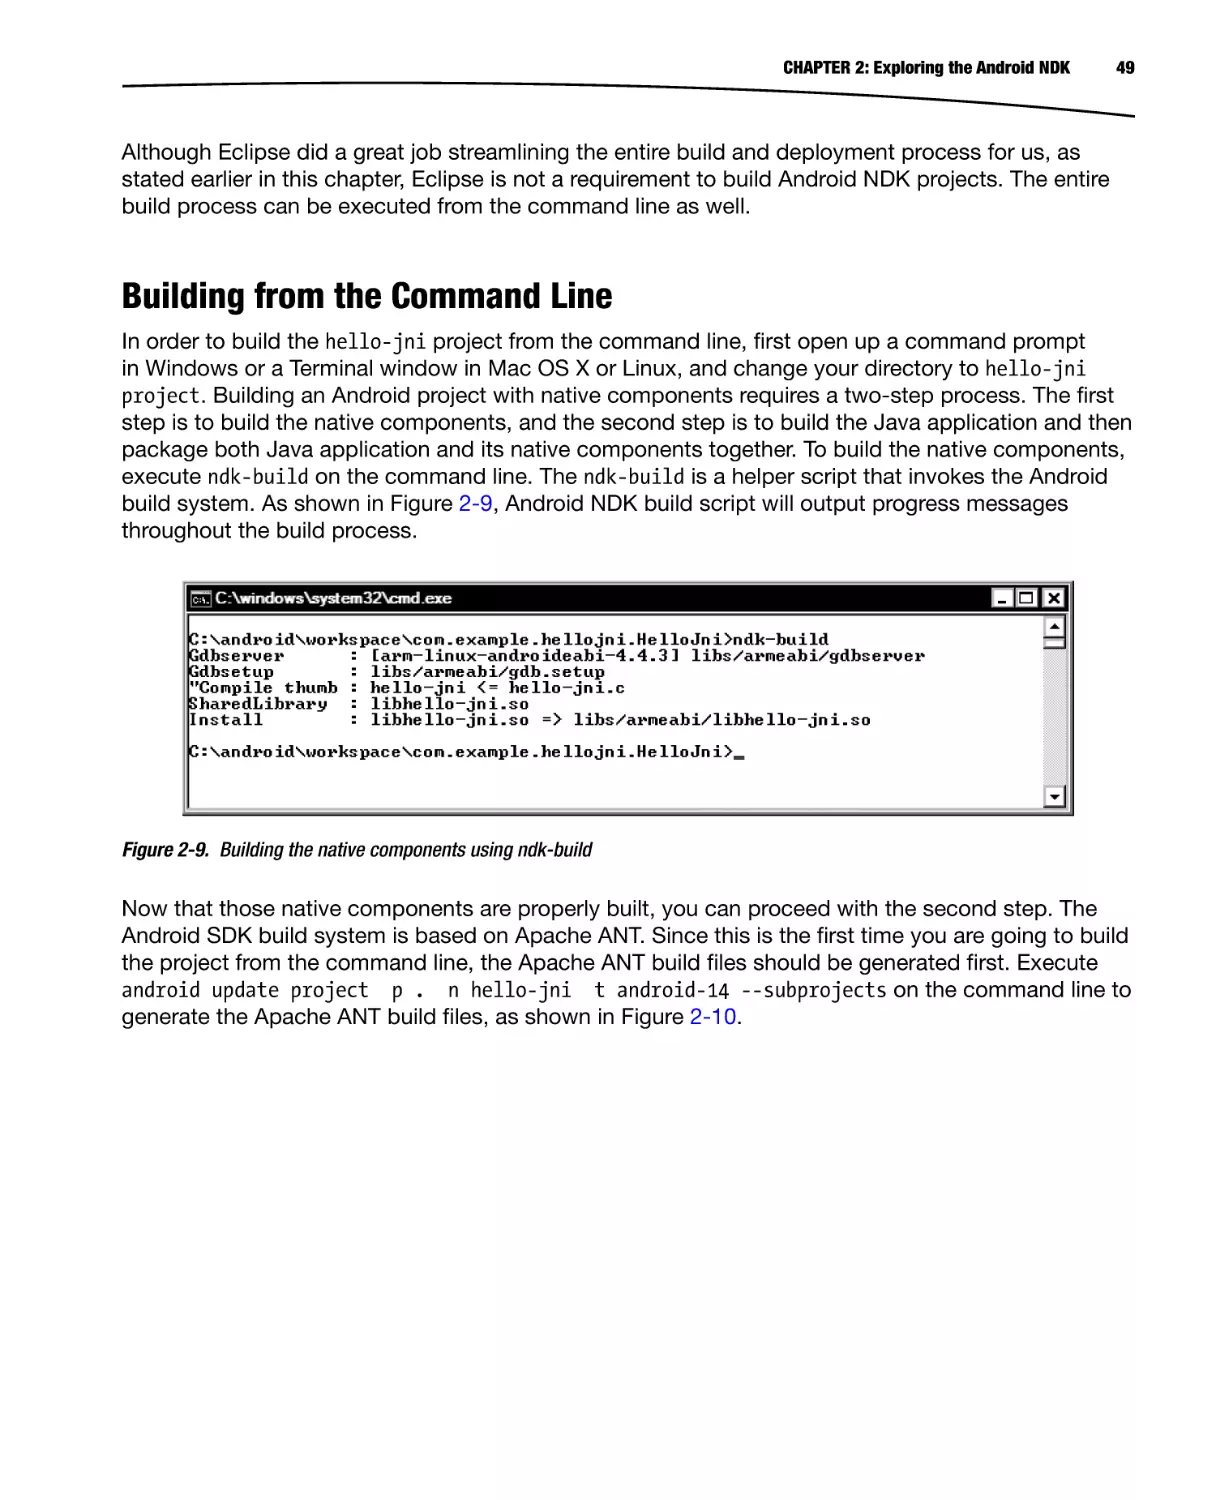 Building from the Command Line